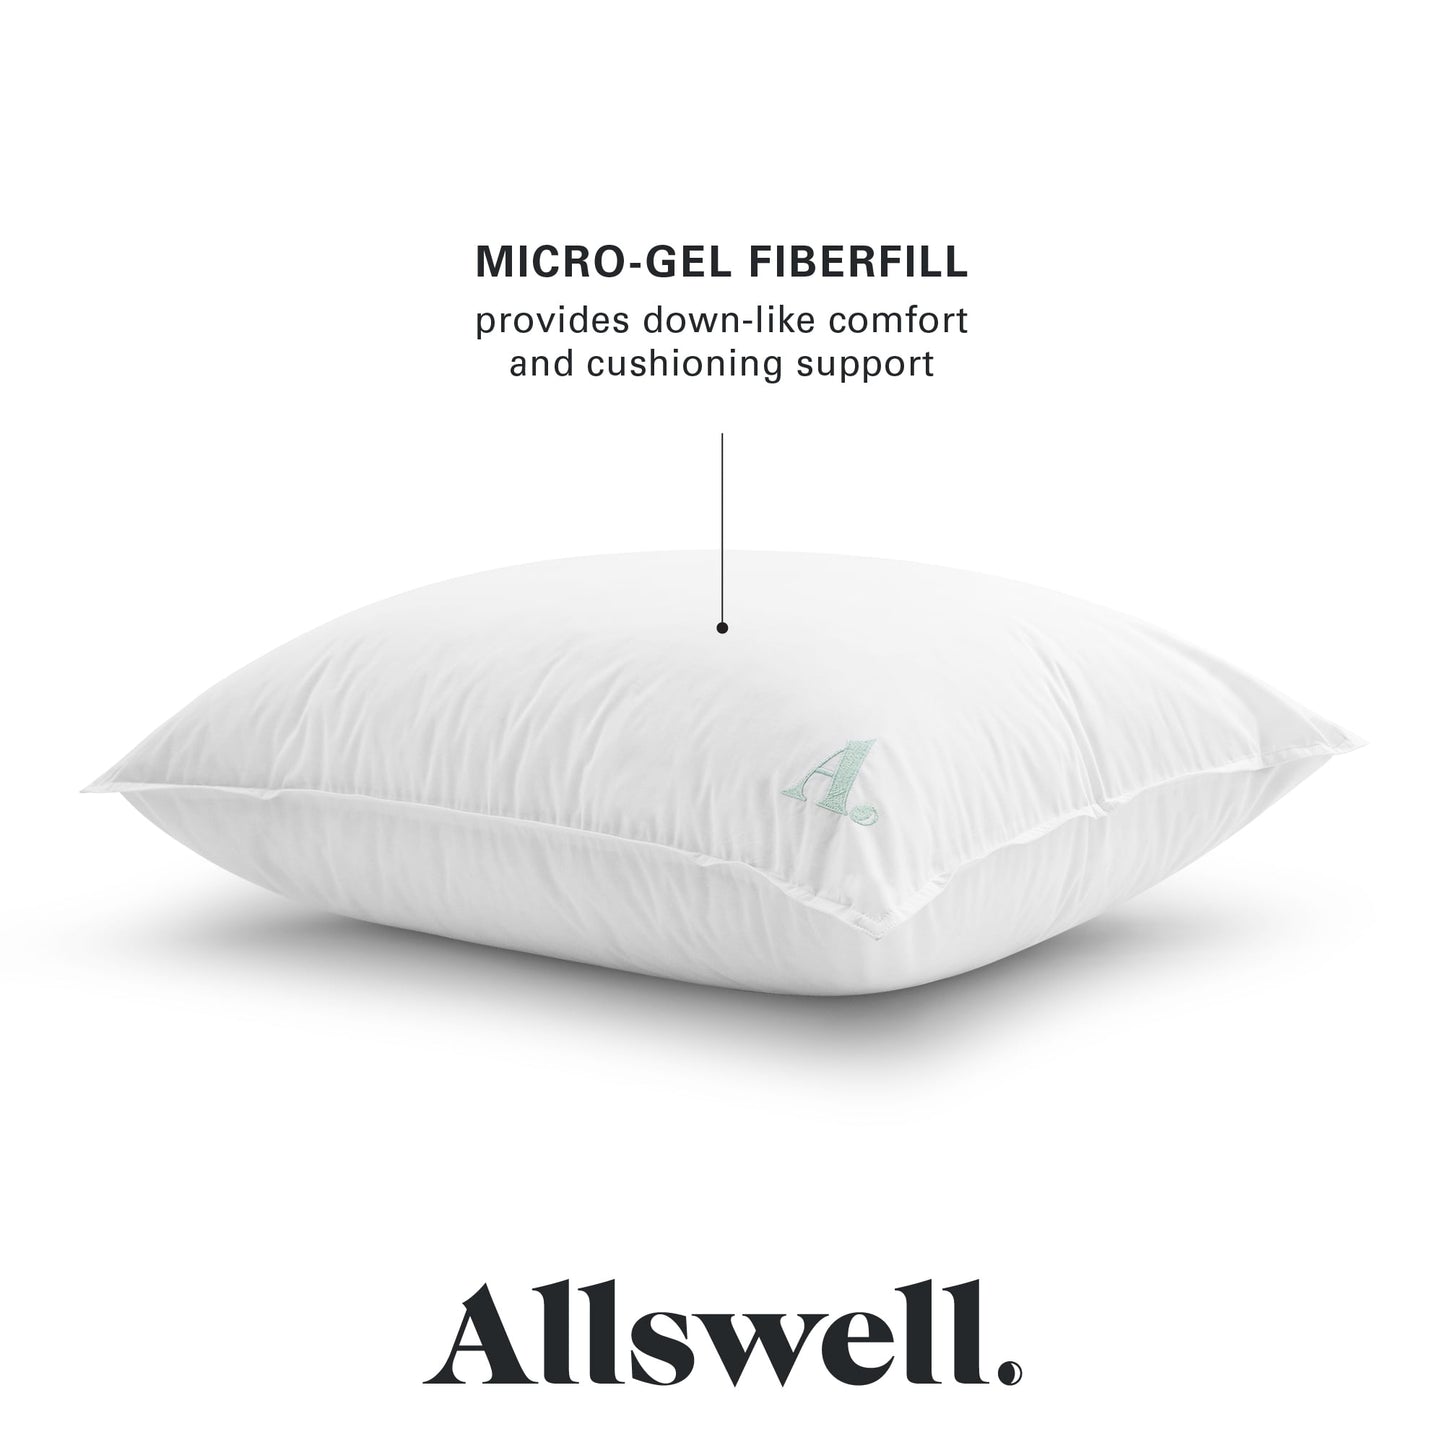 Allswell Organic Cotton Down-like Bed Pillow, Standard/Queen